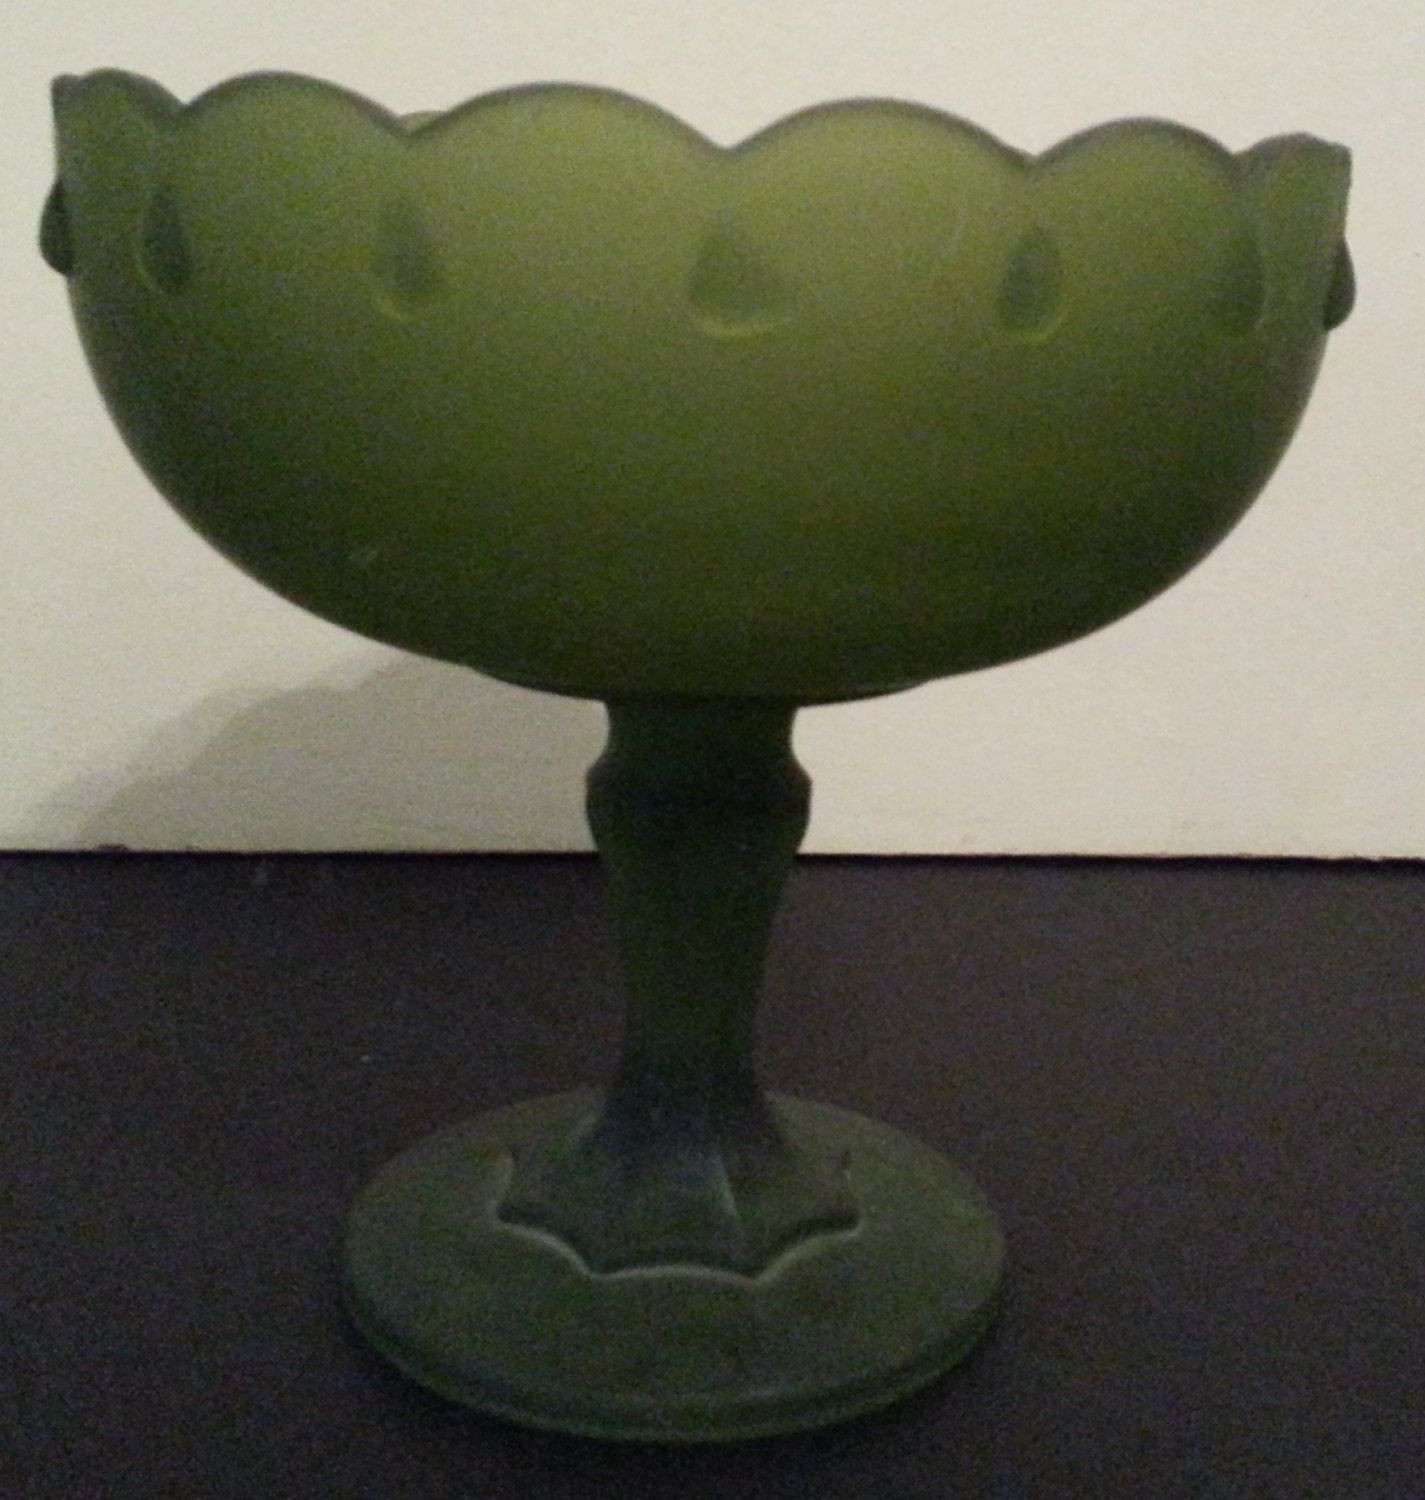 19 Stylish Green Bubble Glass Vase 2022 free download green bubble glass vase of vintage indiana glass frosted green satin mist teardrop compote for vintage indiana glass frosted green satin mist teardrop compote 1003 by cherishedagain on etsy